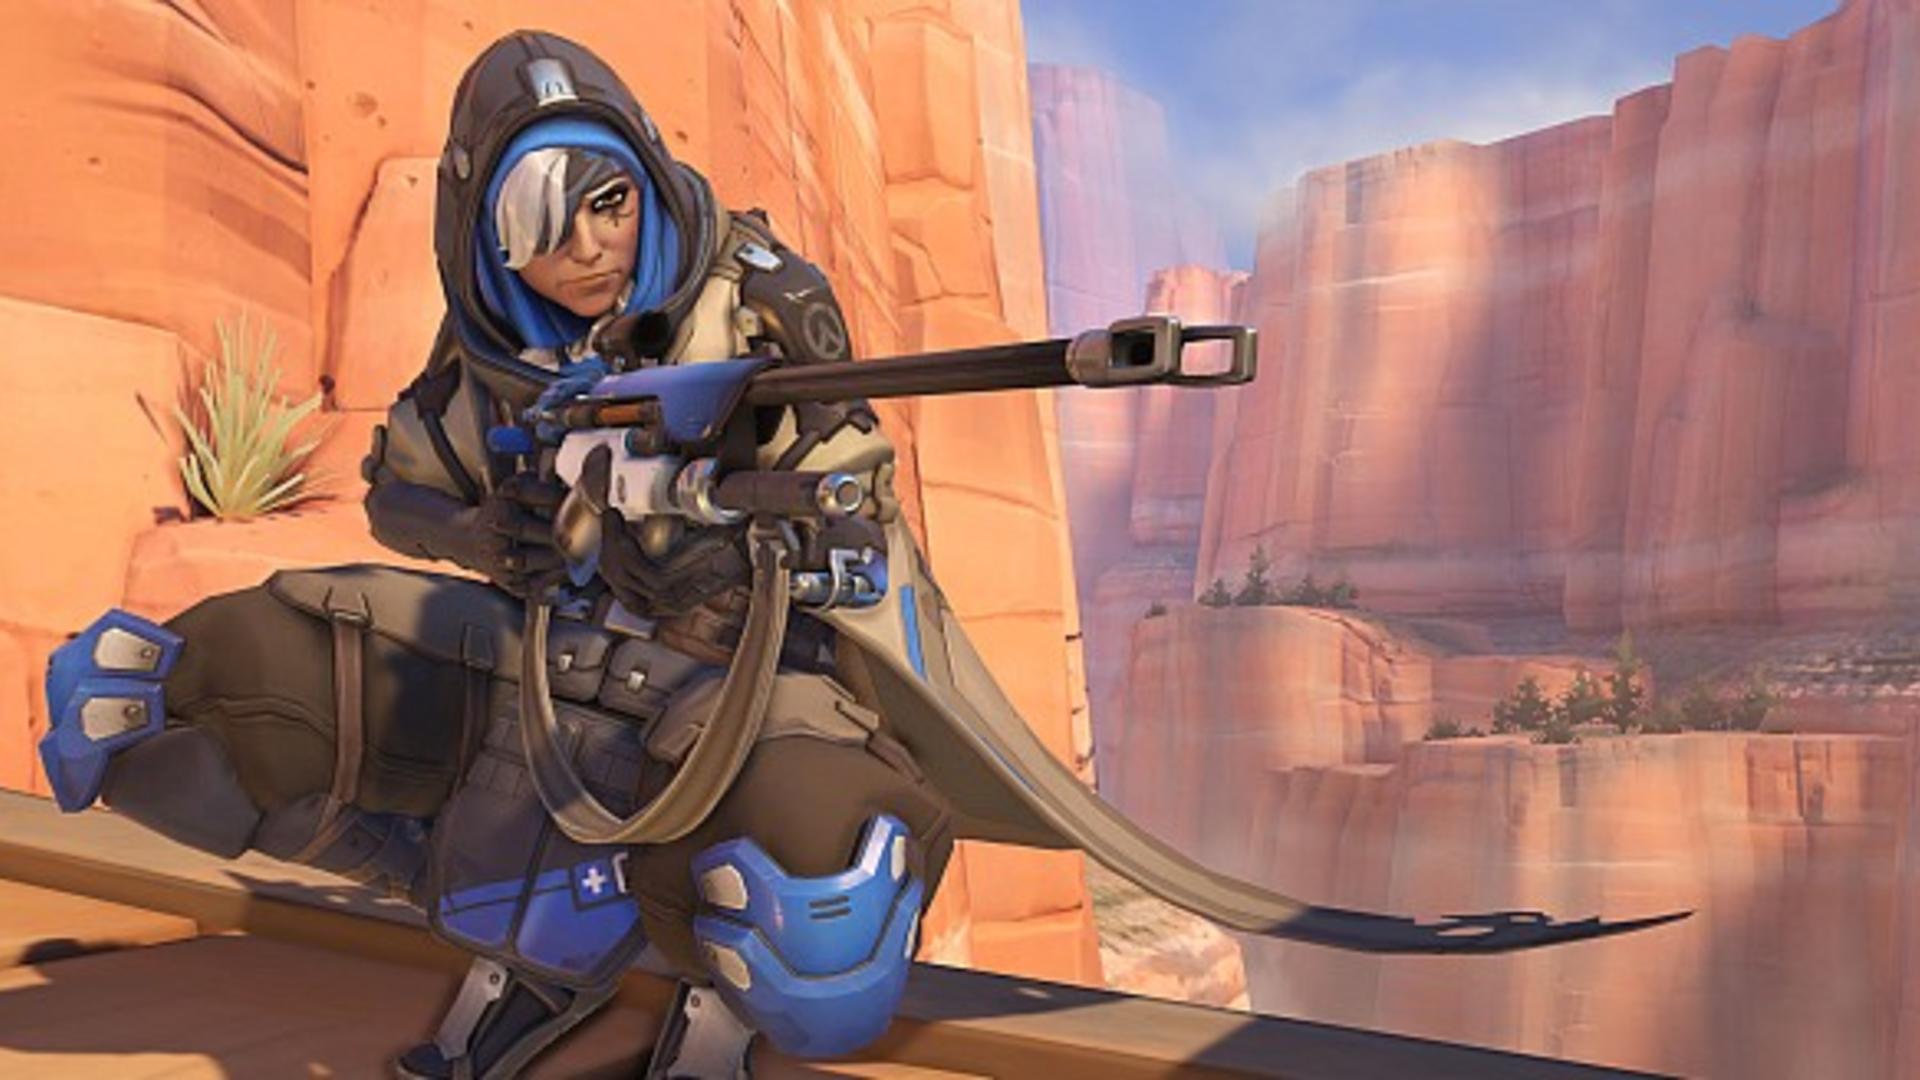 Overwatch: Ana abilities and strategy tips. Rock Paper Shotgun